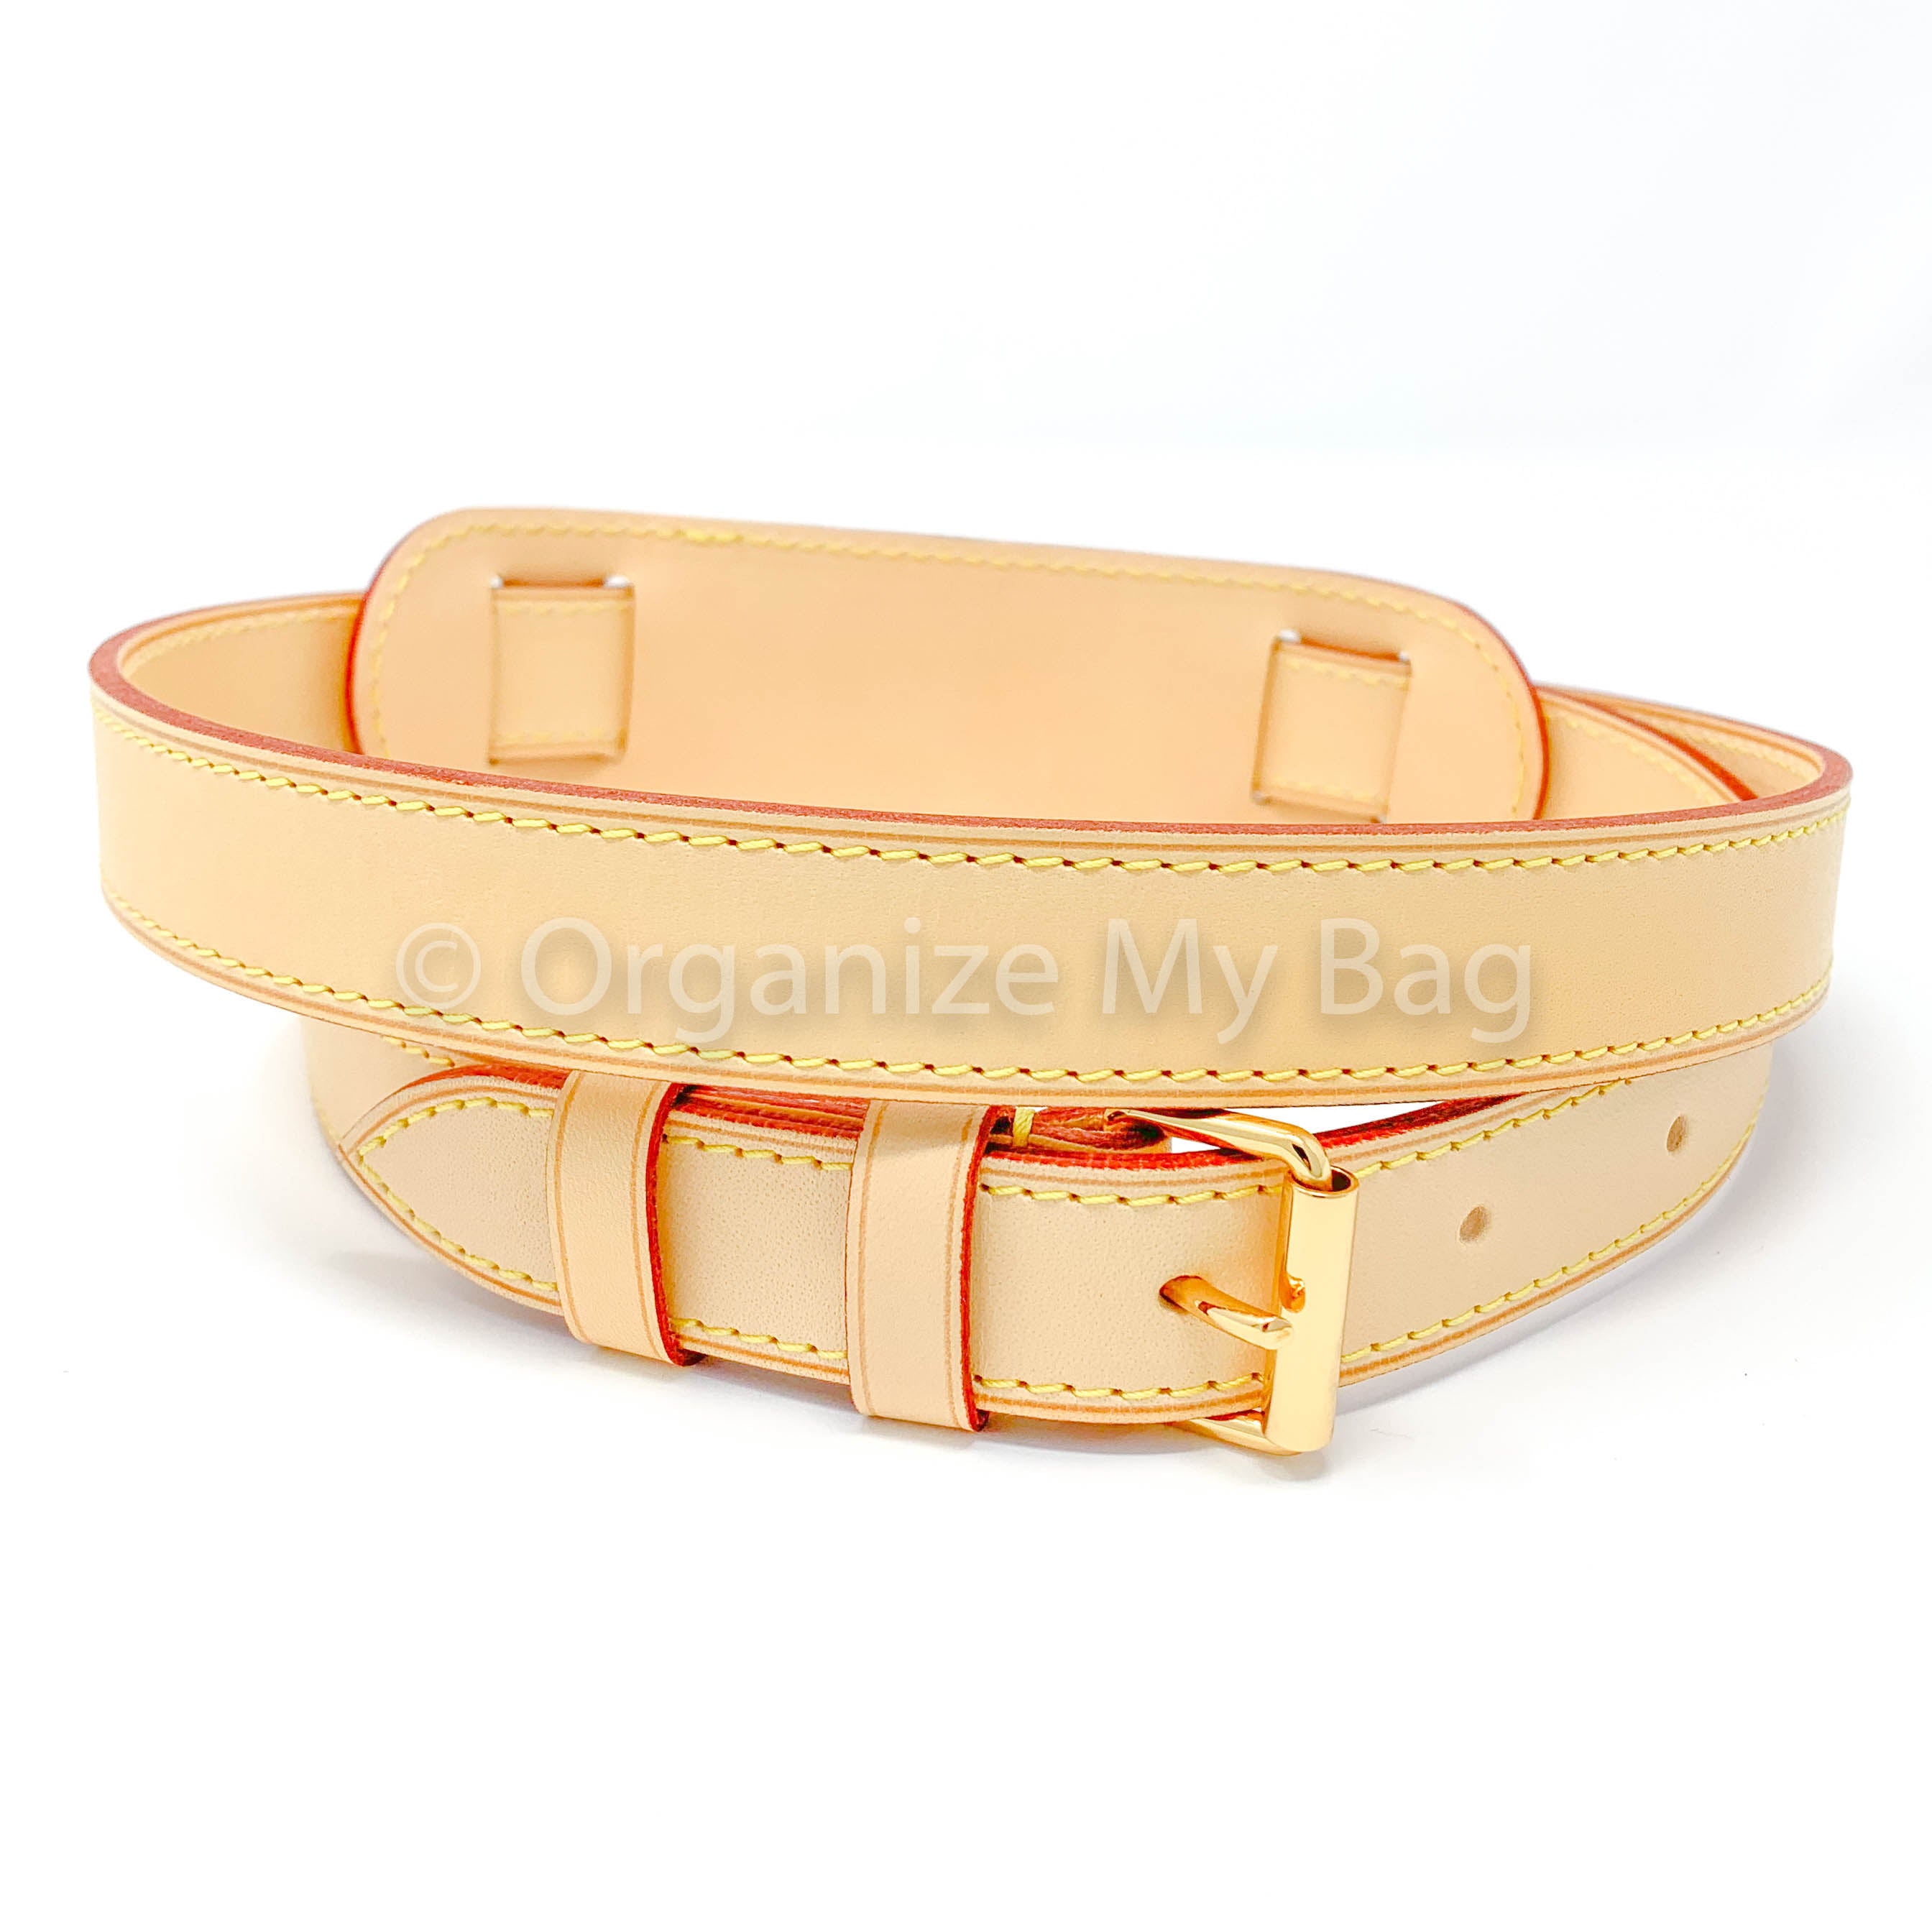 Vachetta Leather Top Handle Purse Strap- Real Vegetable Leather